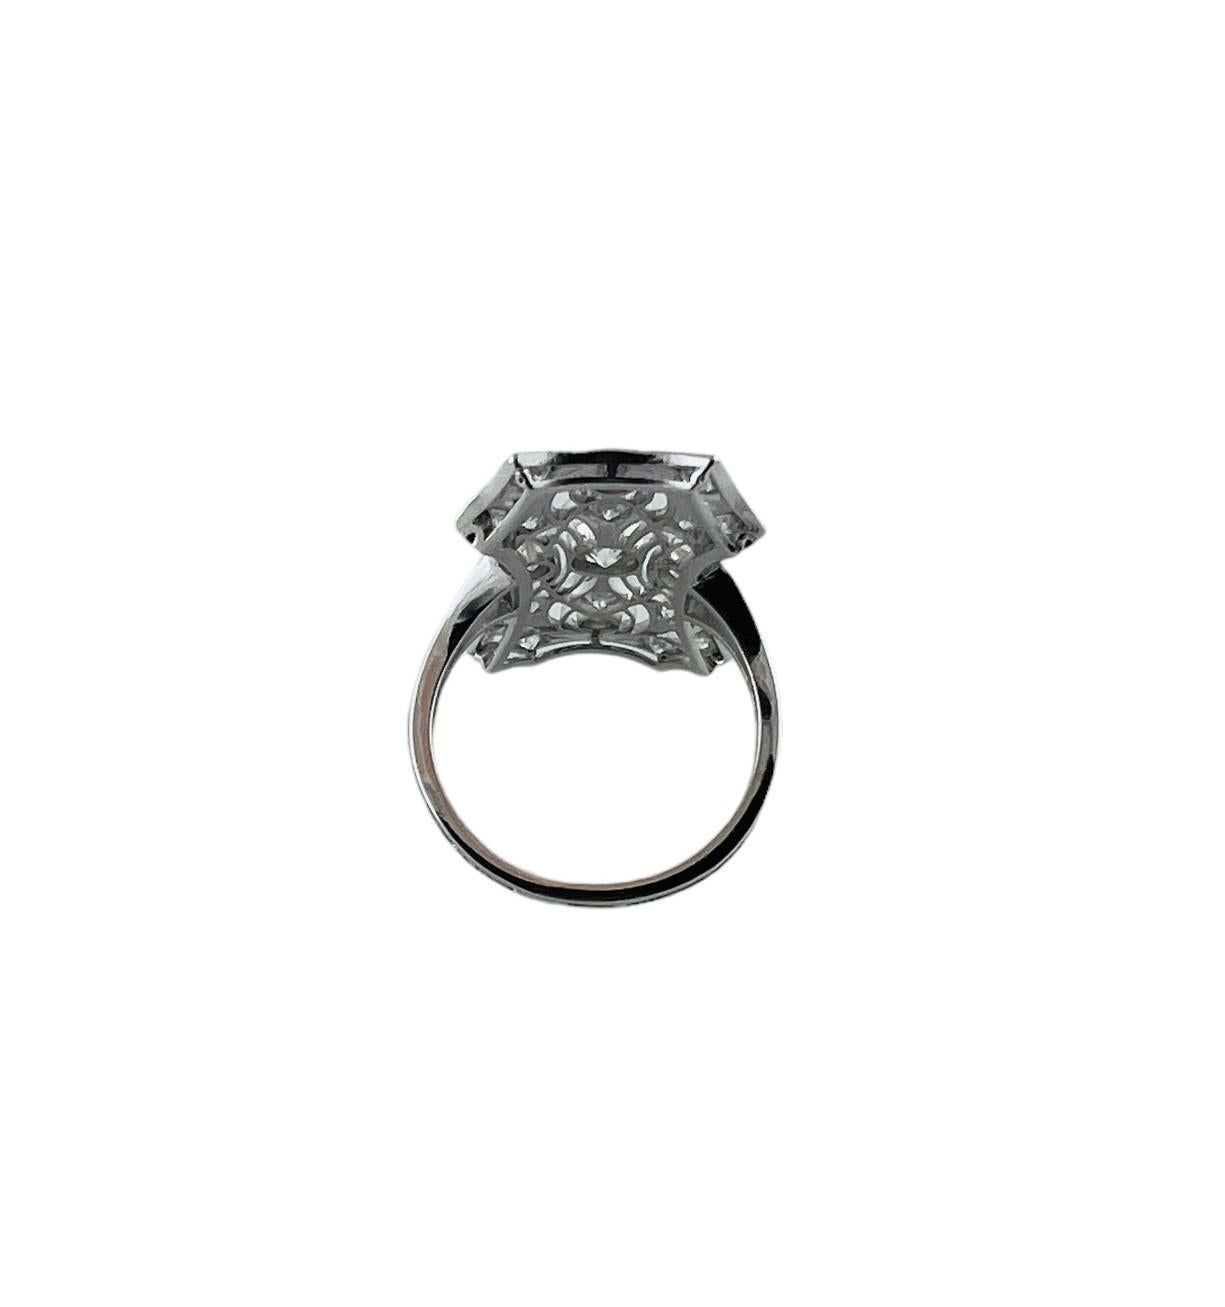 Vintage Platinum and Diamond Long Filigree Ring Size 6.5 #16761 For Sale 3